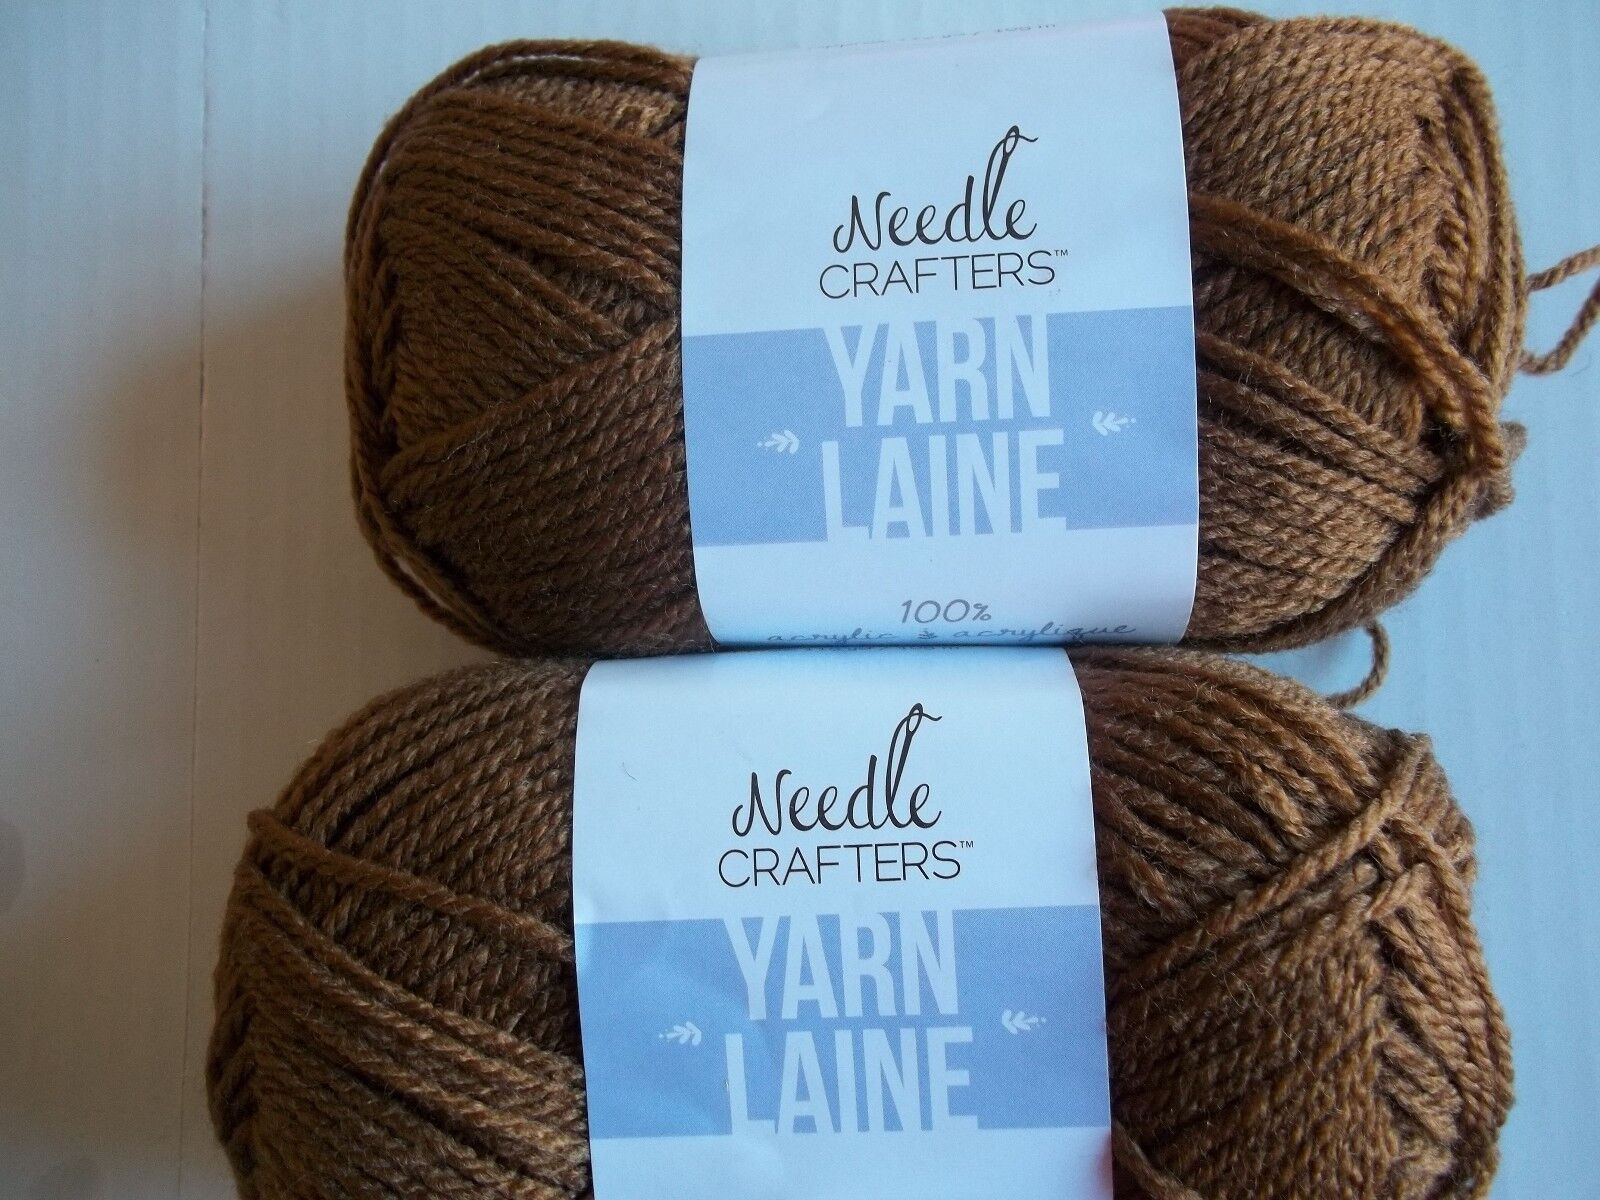 Needle Crafters acrylic Max New Orleans Mall 66% OFF yarn Caffe brown lot 115 e of yds 2